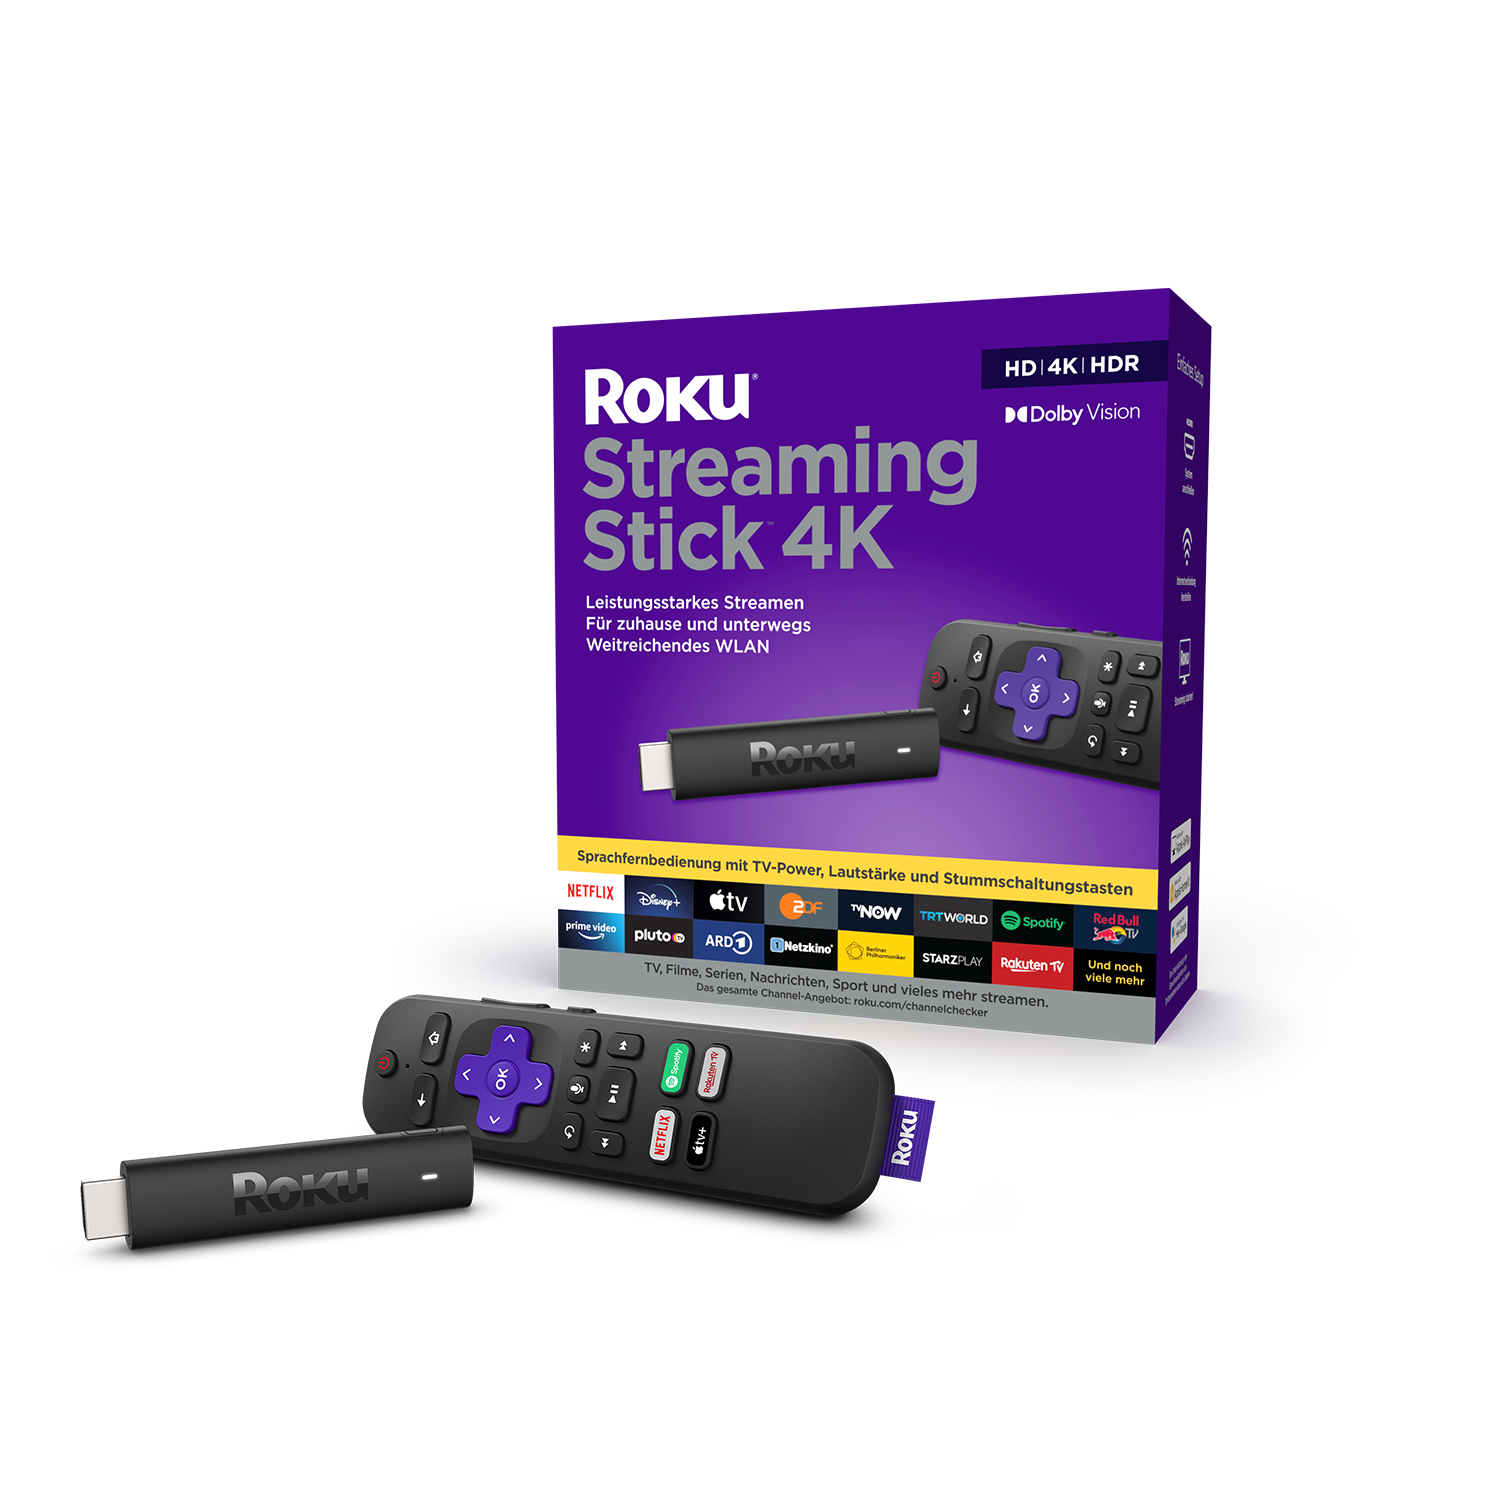 Roku presents streaming line-up for Germany starting at €29.99 | Roku